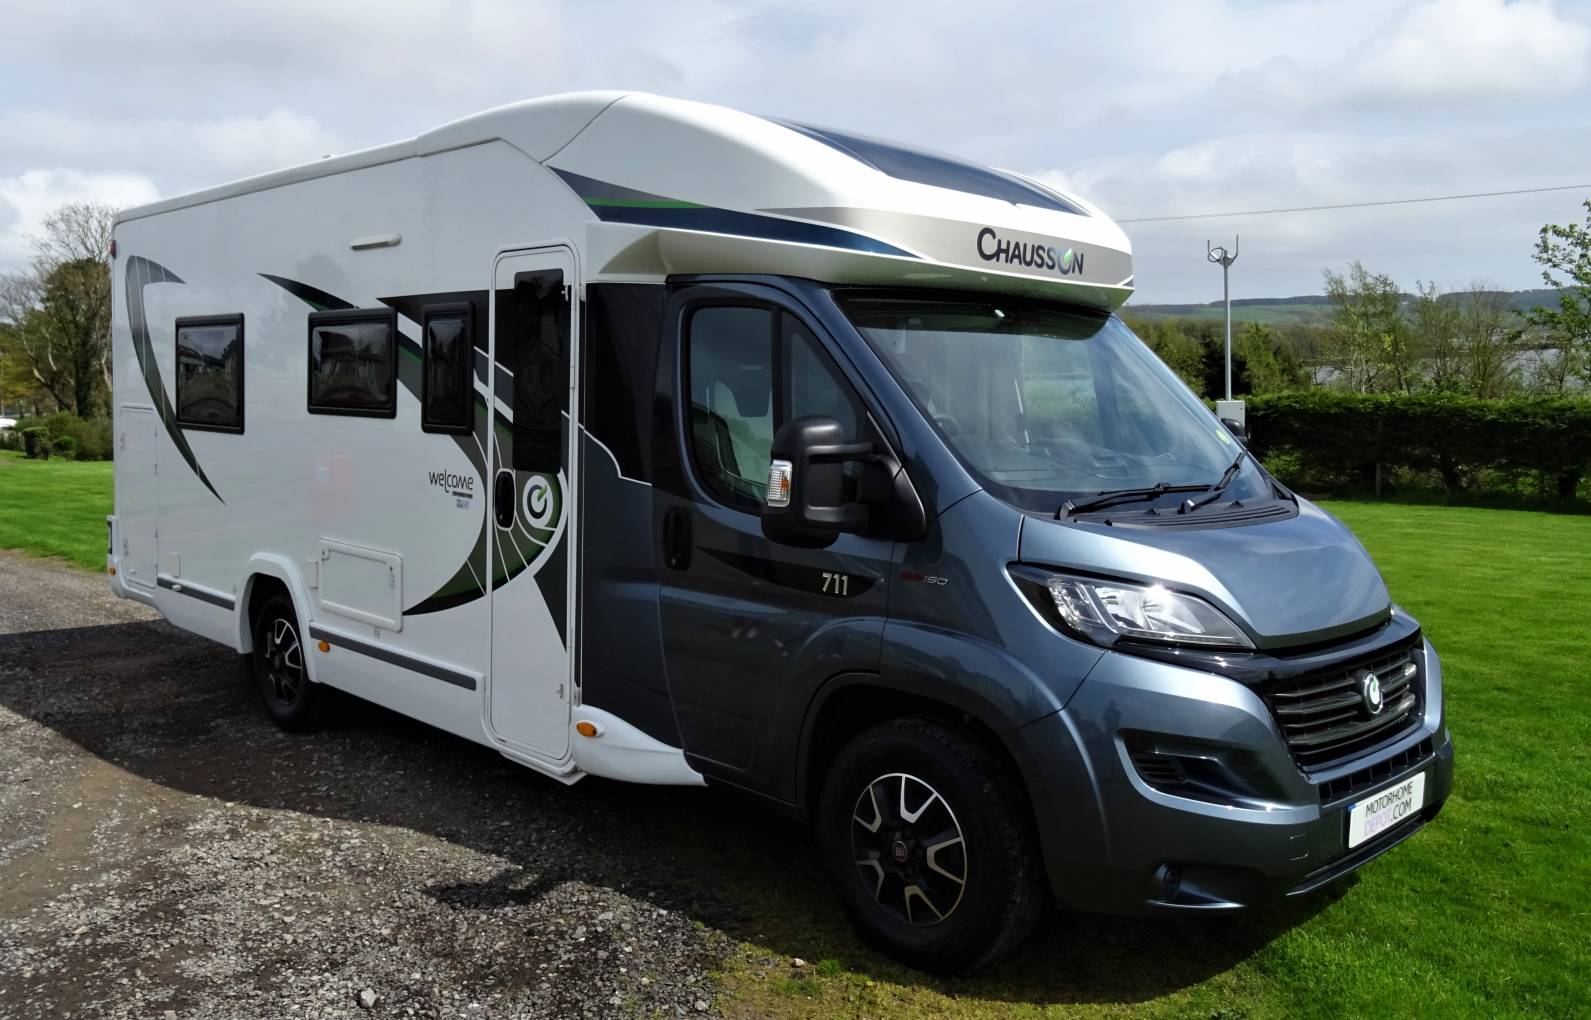 Fiat DUCATO 1.9 TD CAMPING-CAR CHAUSSON WELCOME 50 - Mon Agence